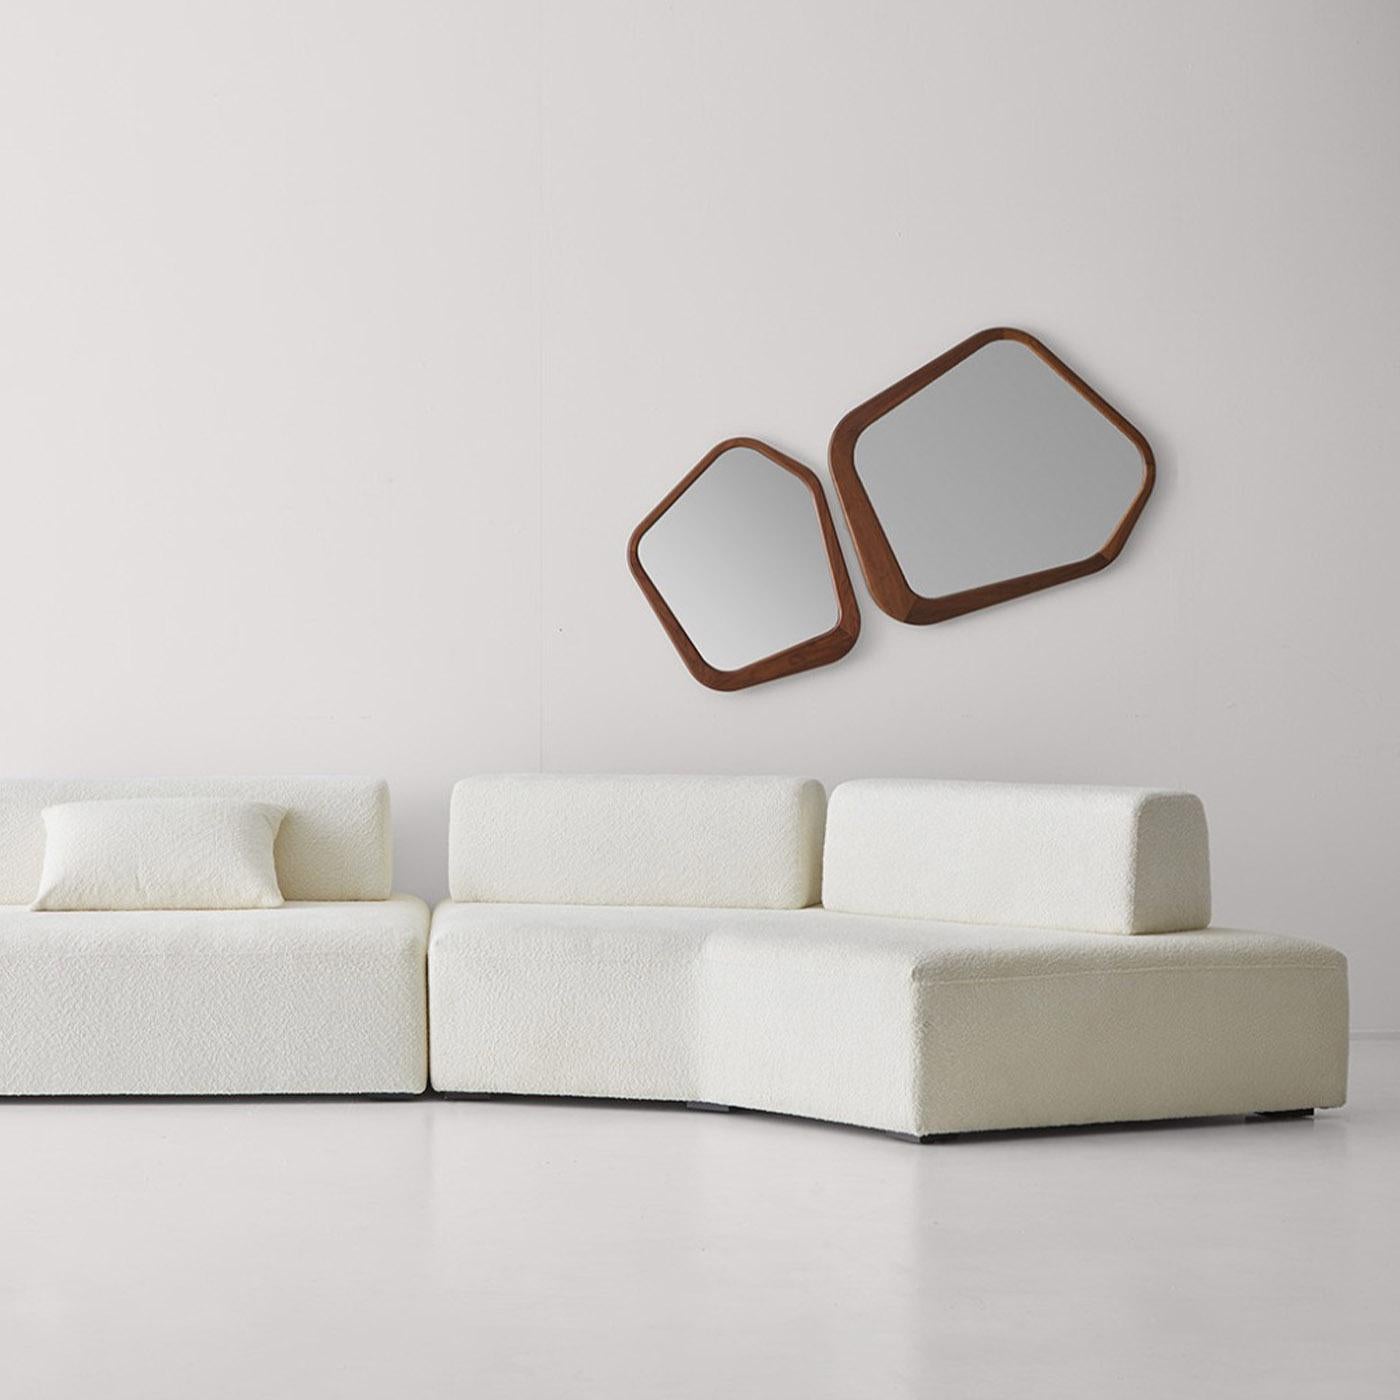 Pair of mirrors in solid Canaletto walnut. It is possible to hang them in any position at 360 °. Ecological water-based varnish and Havana Canaletto finish. The small mirror measures 52 x 44 cm and the large 73 x 80 cm.